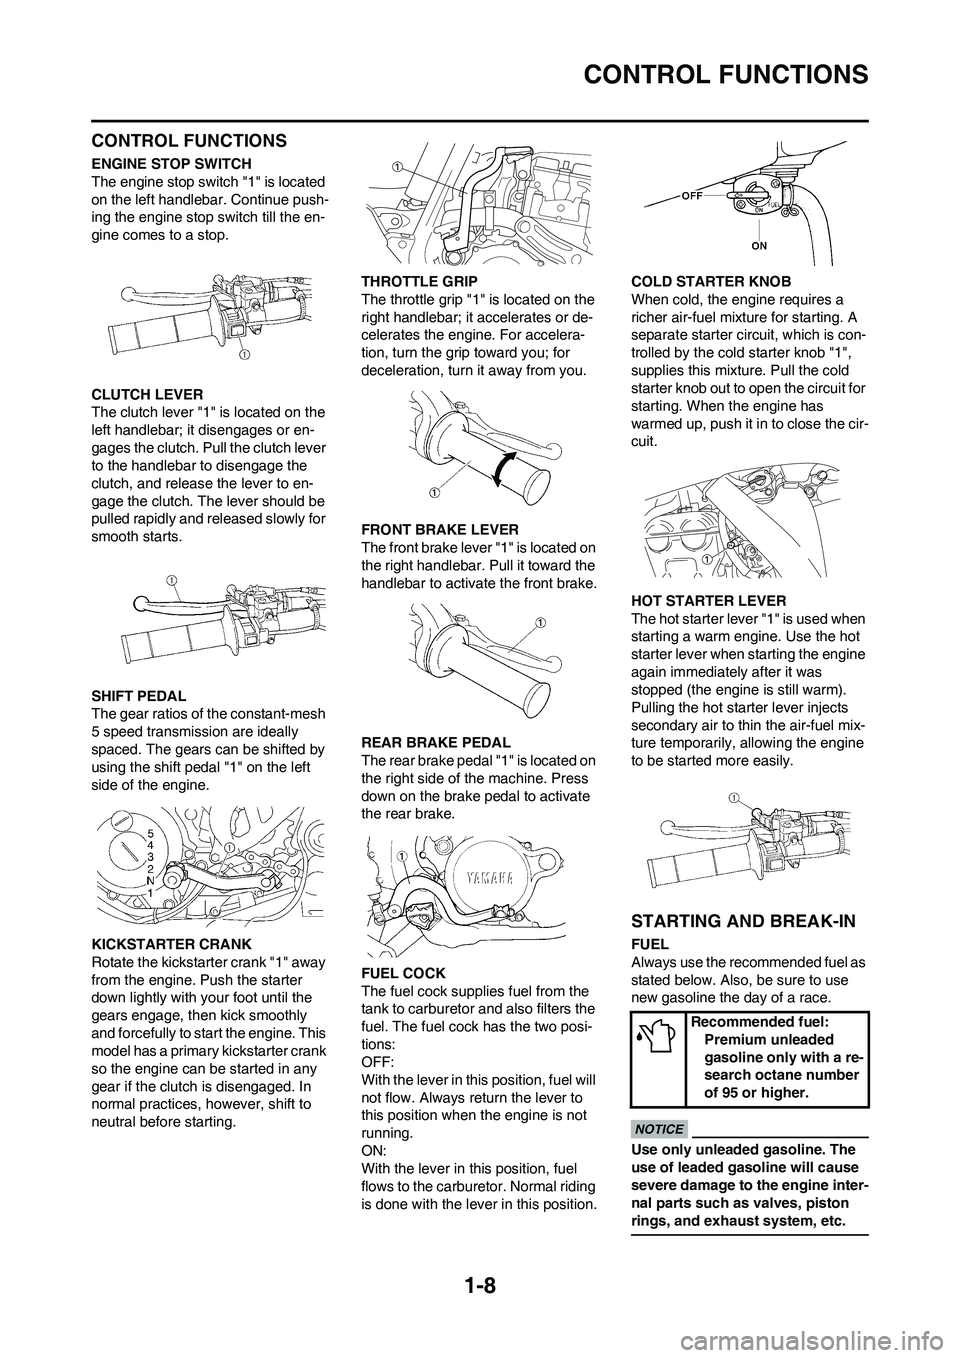 YAMAHA YZ450F 2009 User Guide 1-8
CONTROL FUNCTIONS
CONTROL FUNCTIONS
ENGINE STOP SWITCH
The engine stop switch "1" is located 
on the left handlebar. Continue push-
ing the engine stop switch till the en-
gine comes to a stop.
CL